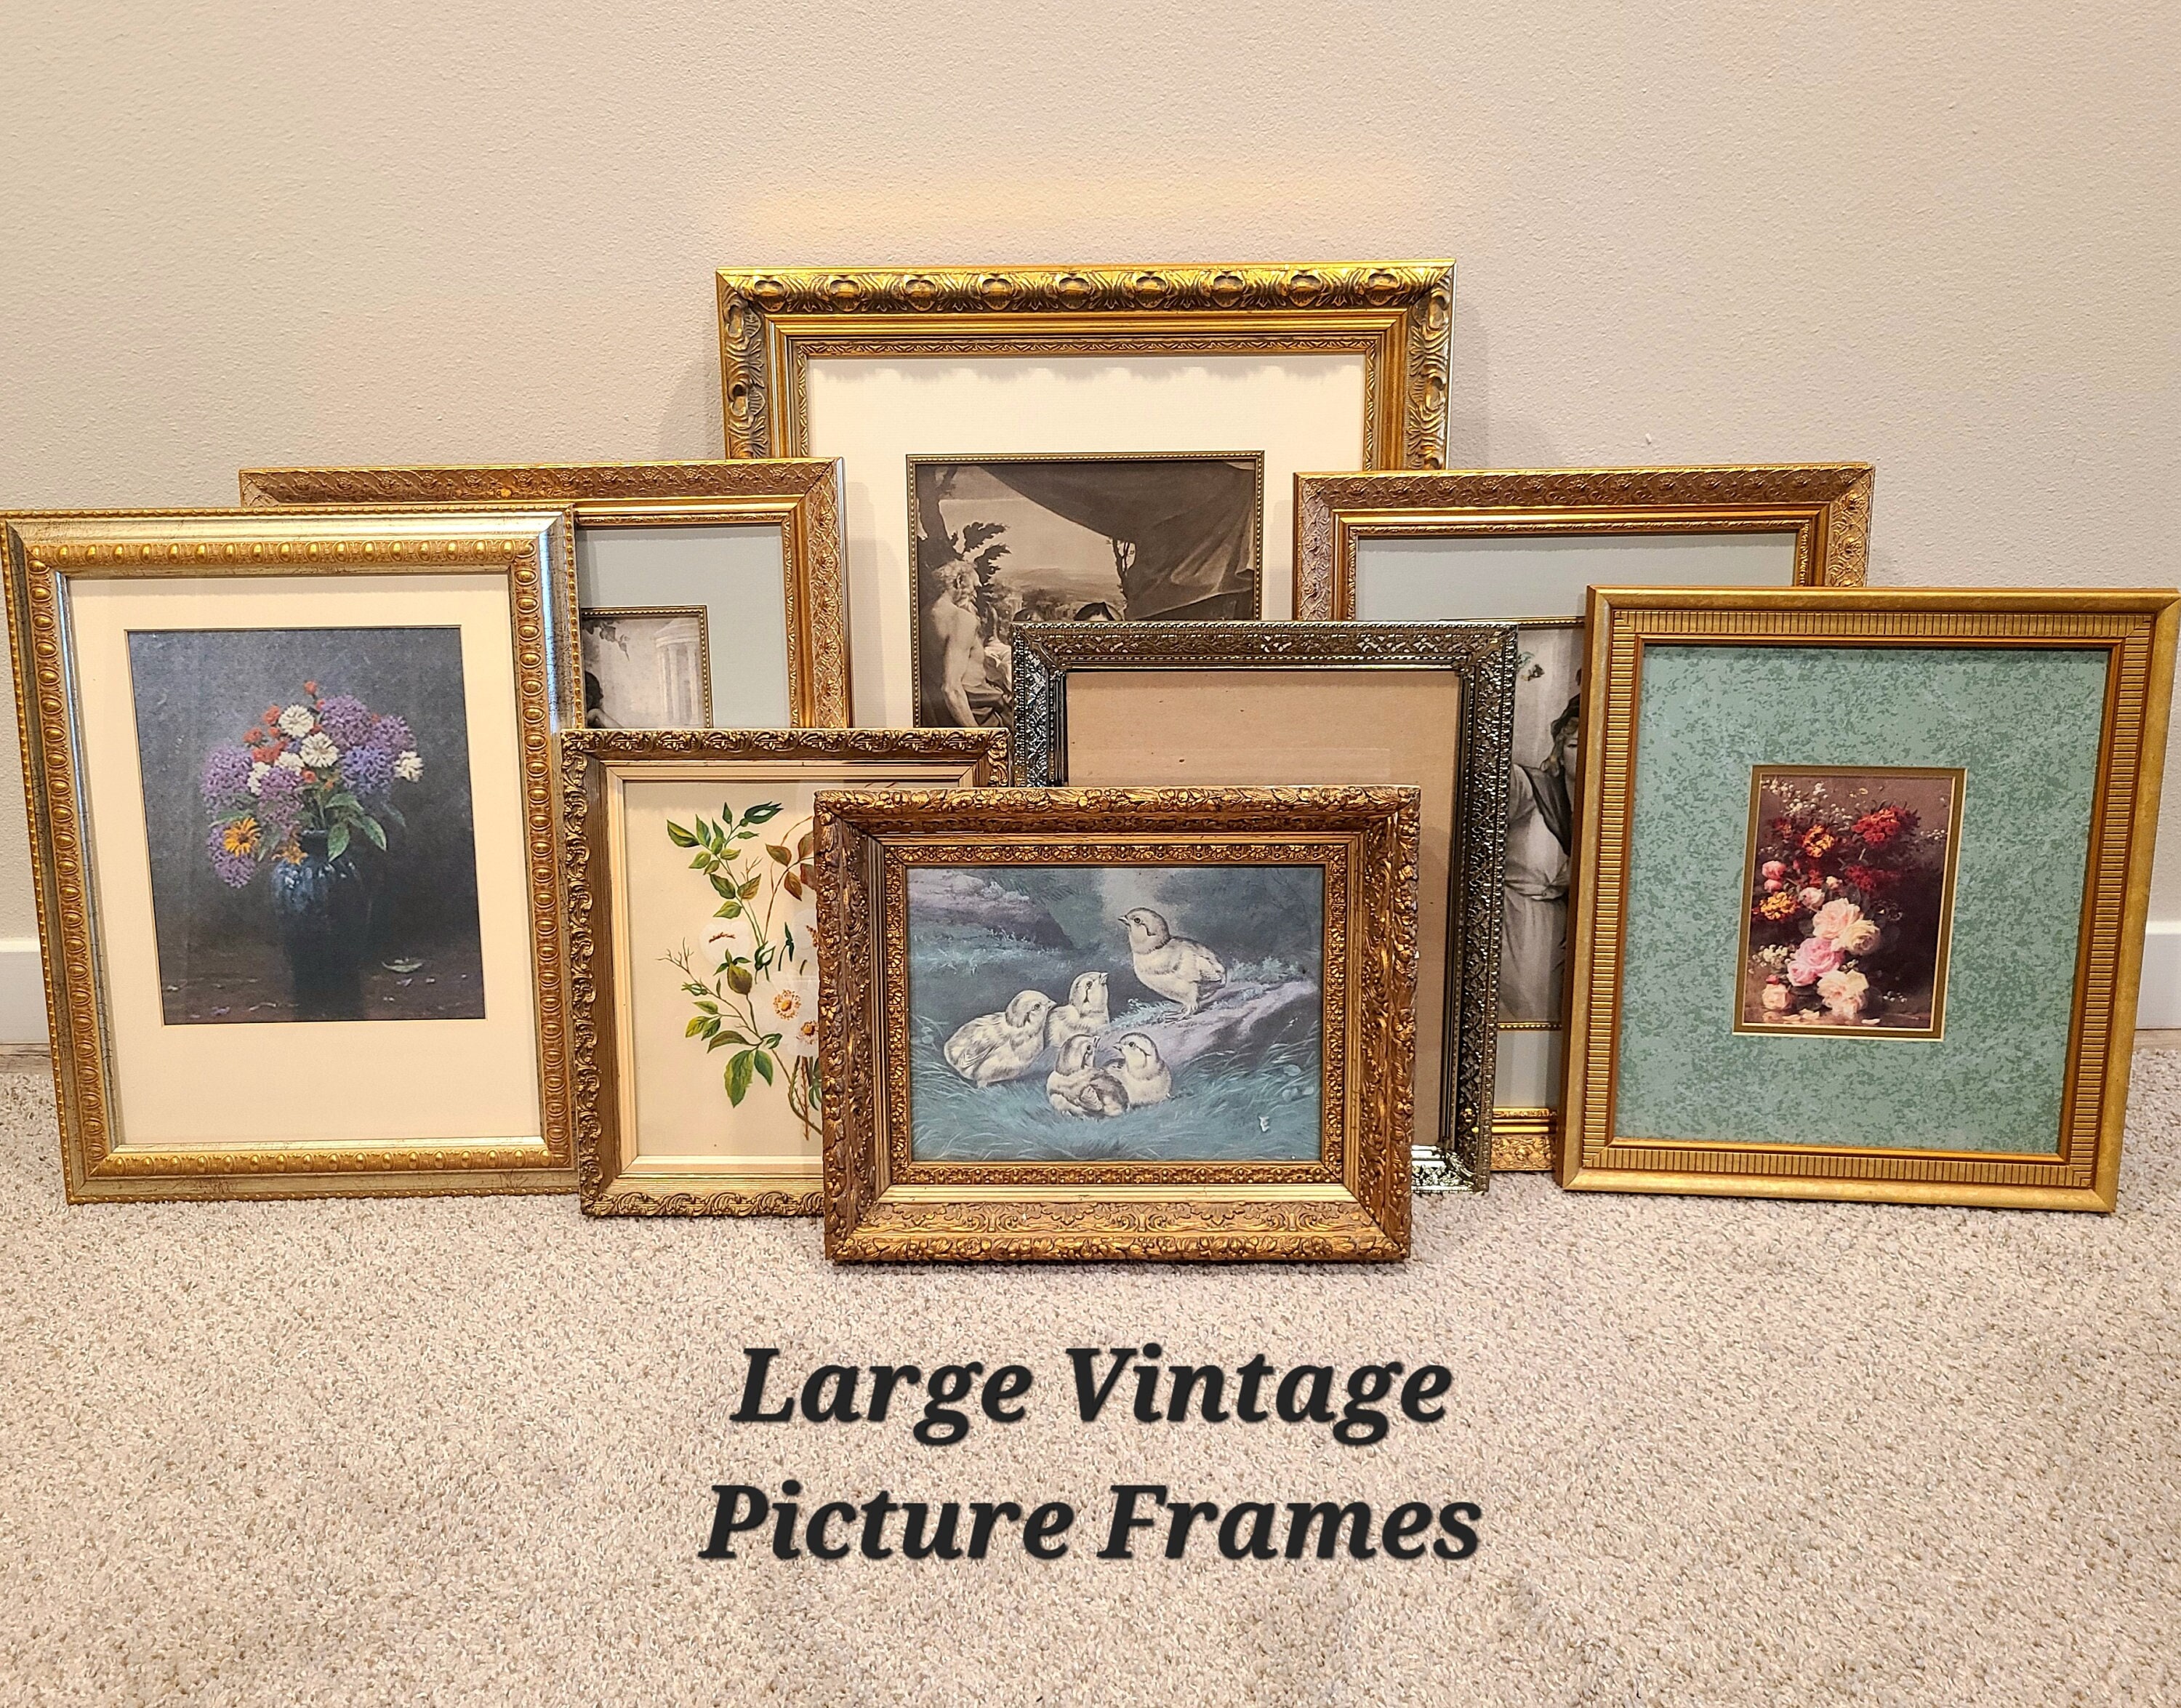 16x20 Vintage Frame Decorative French Home Decor Ornate Wall